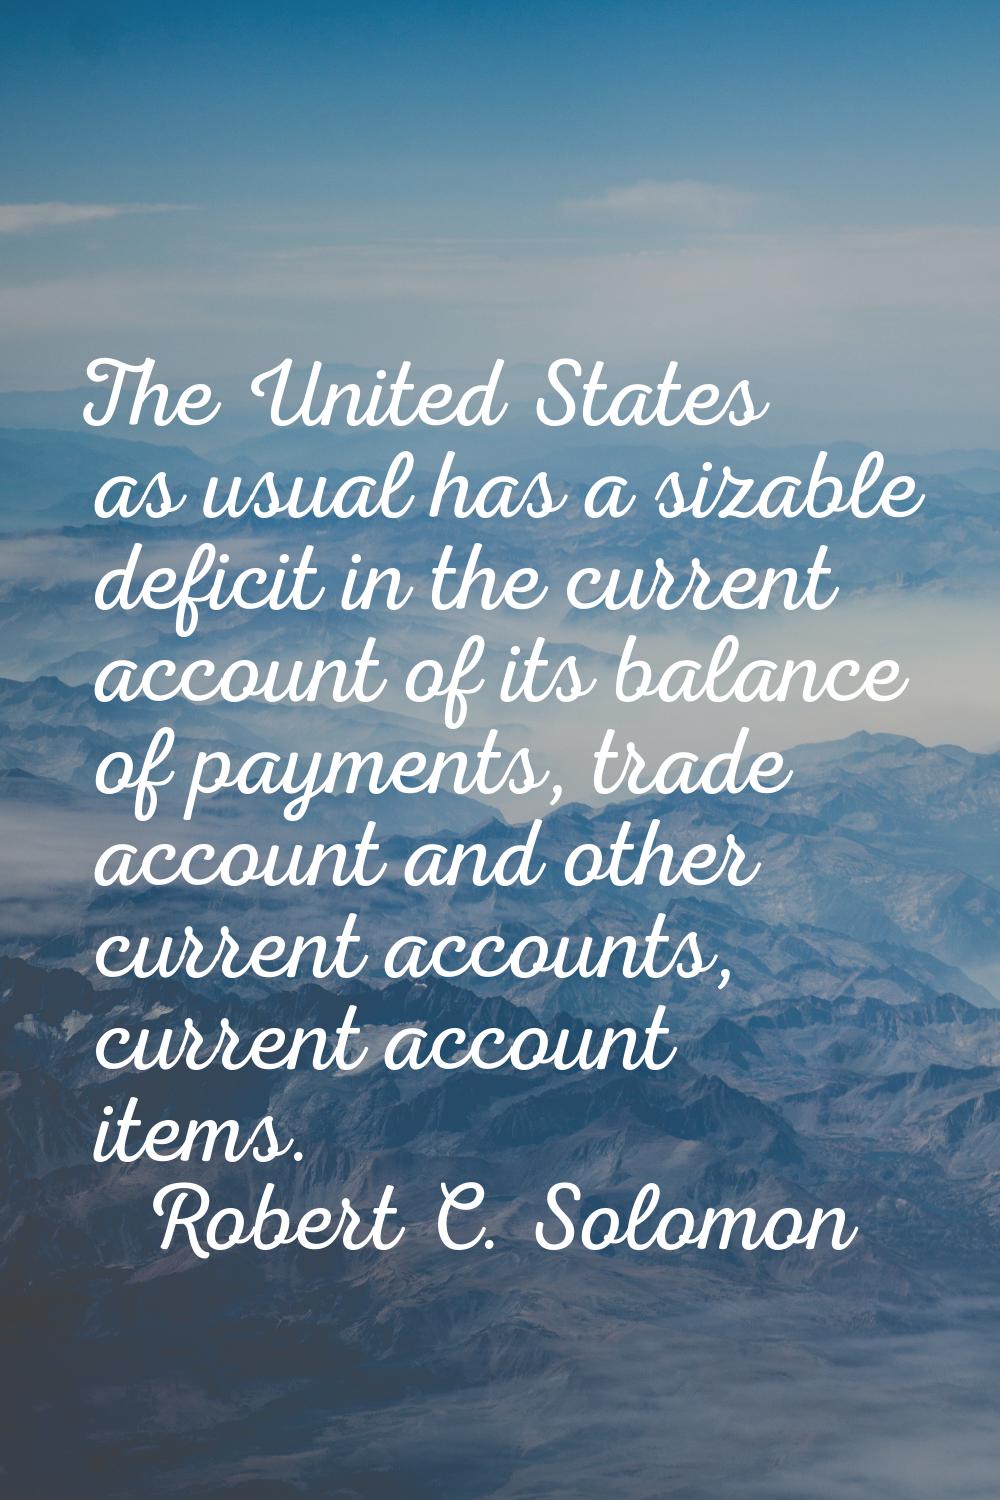 The United States as usual has a sizable deficit in the current account of its balance of payments,